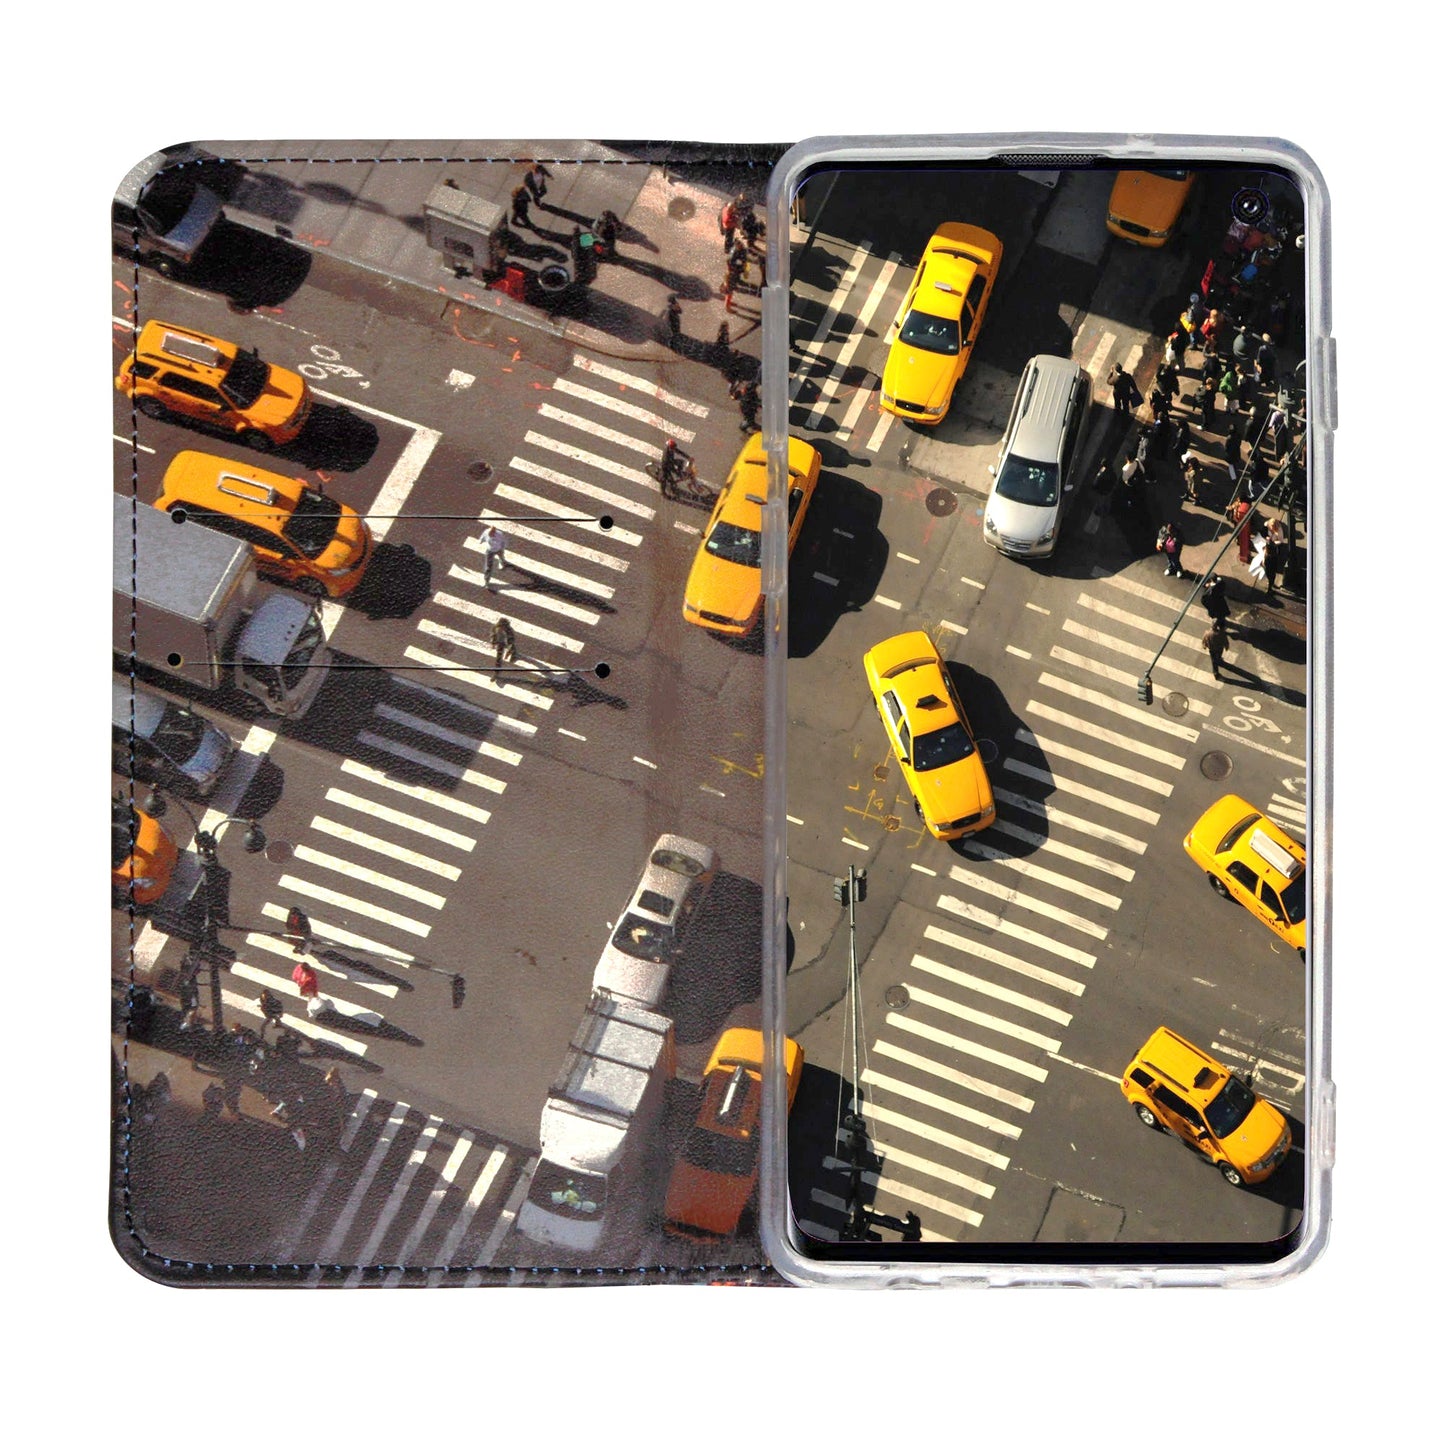 New York City Panoramic Case for Samsung Galaxy S10